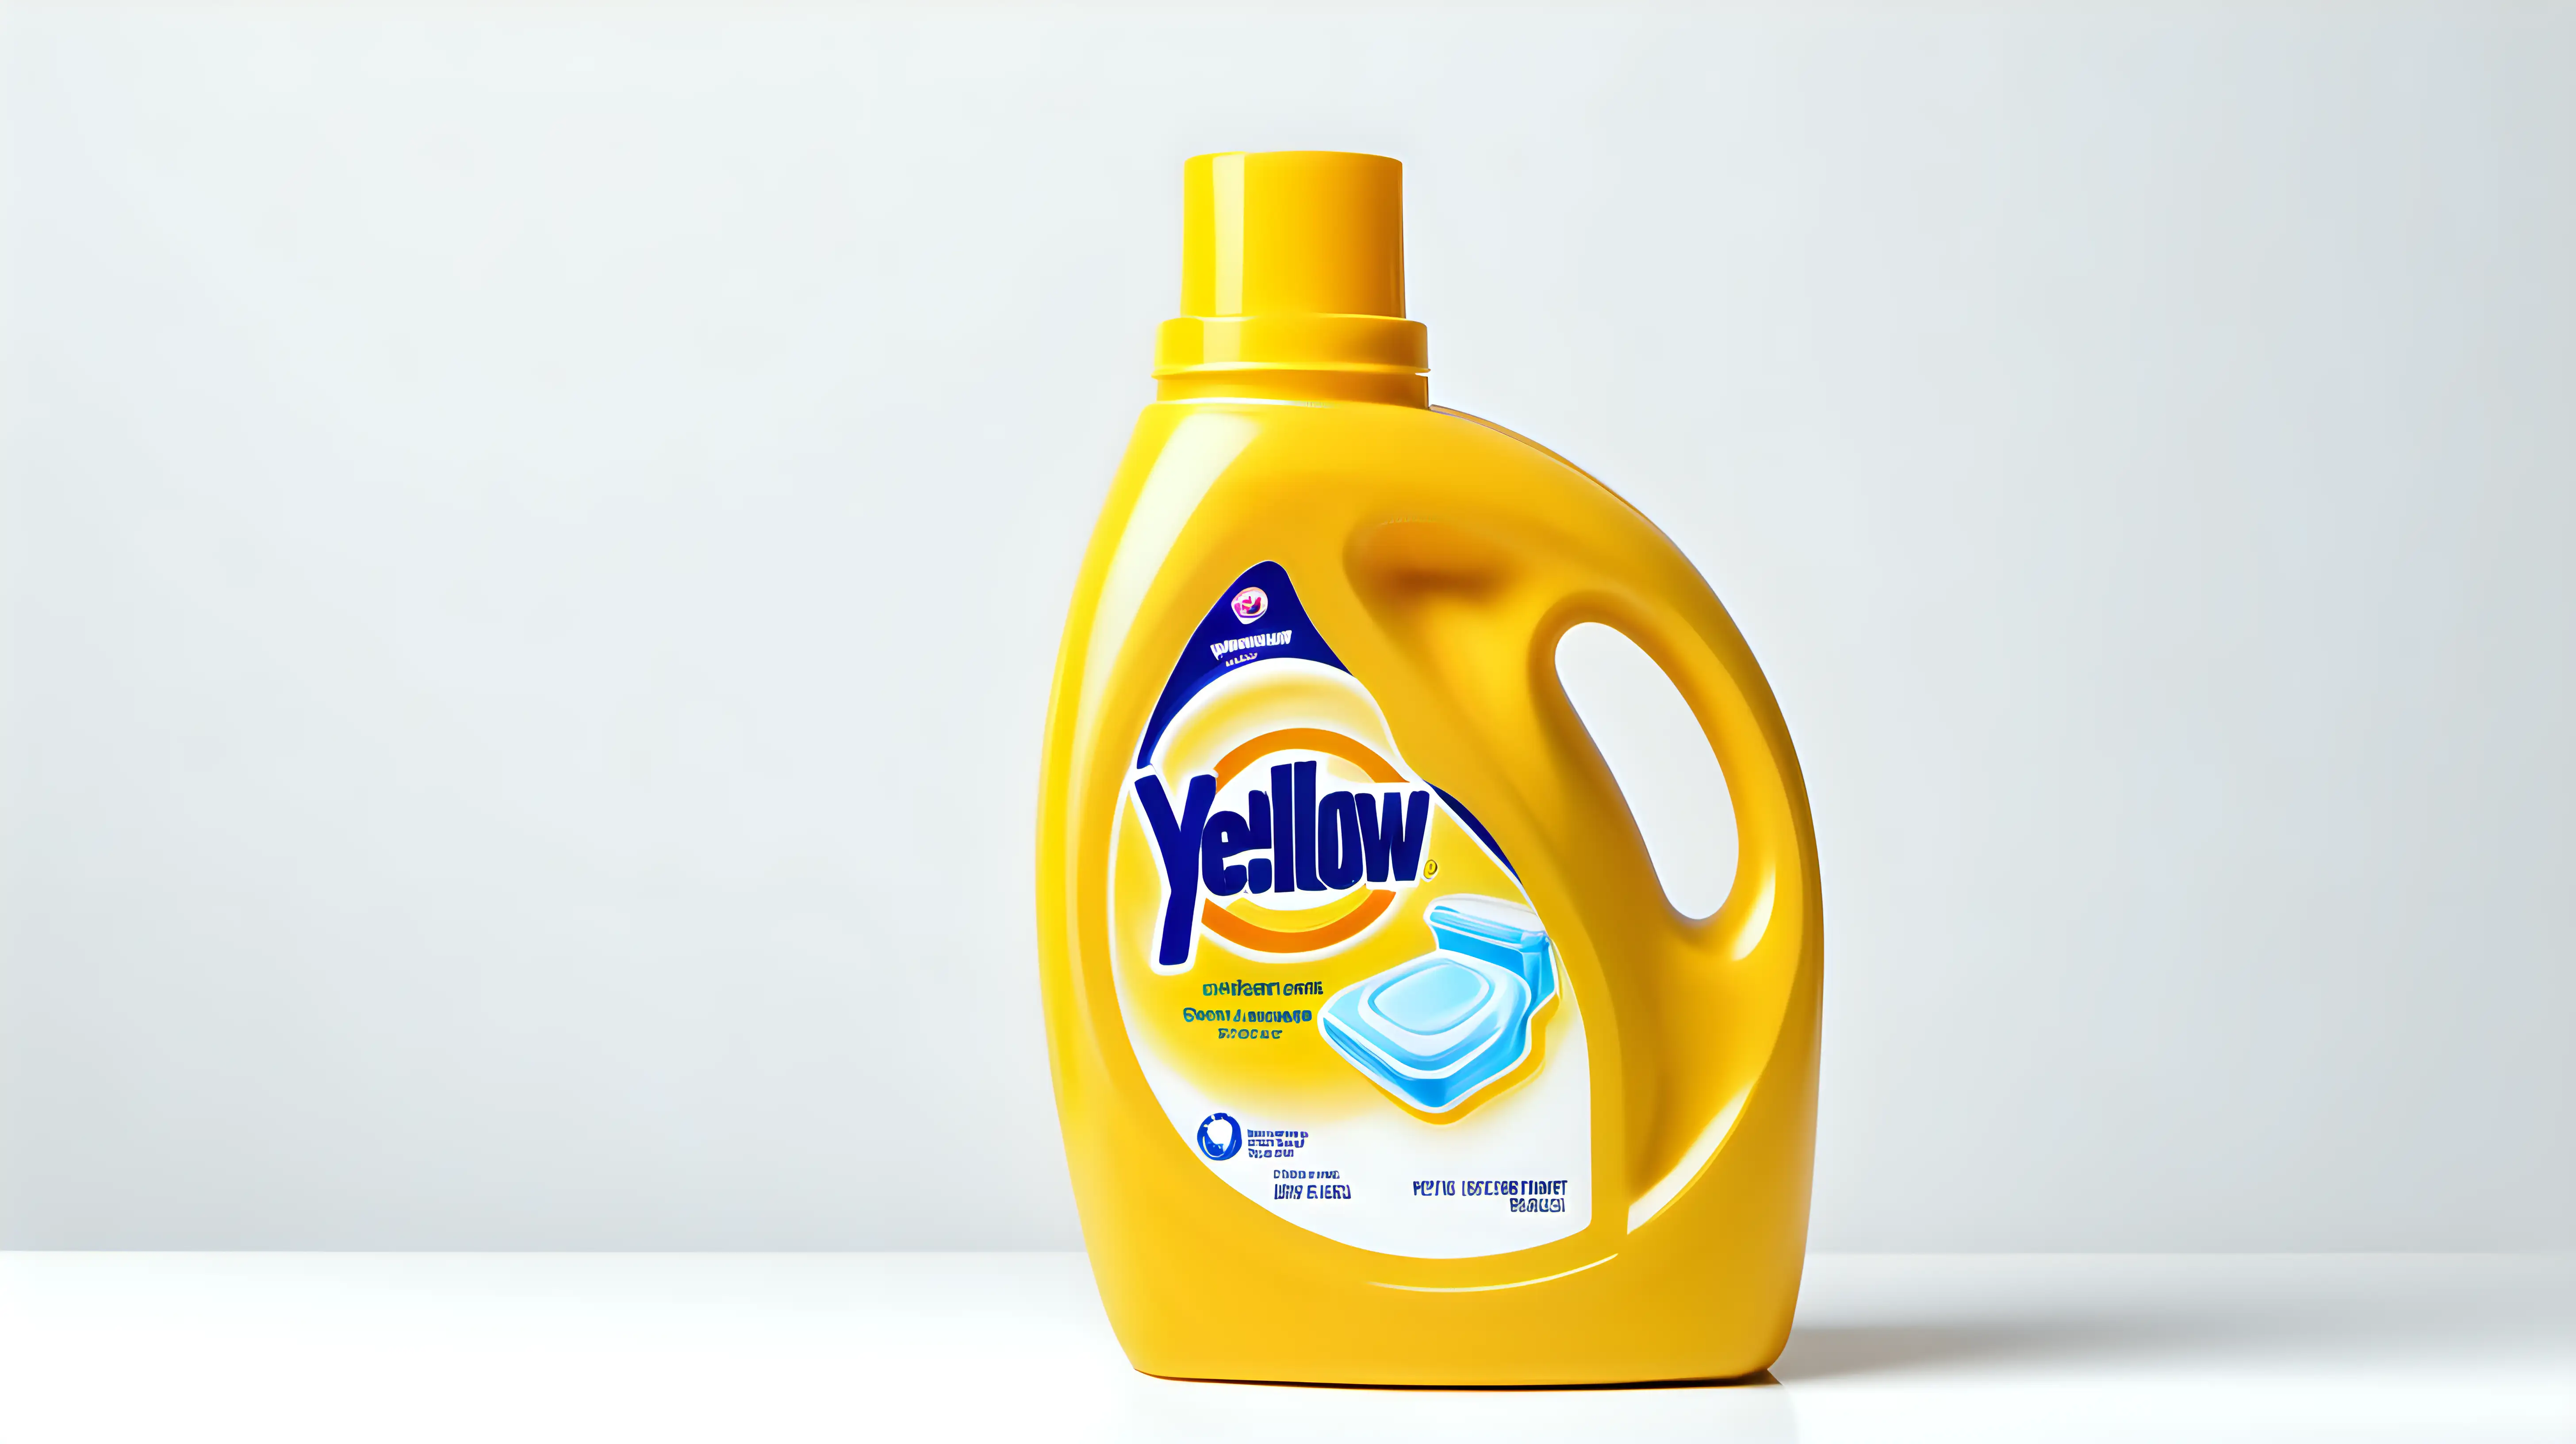 yewllow detergent container on white background